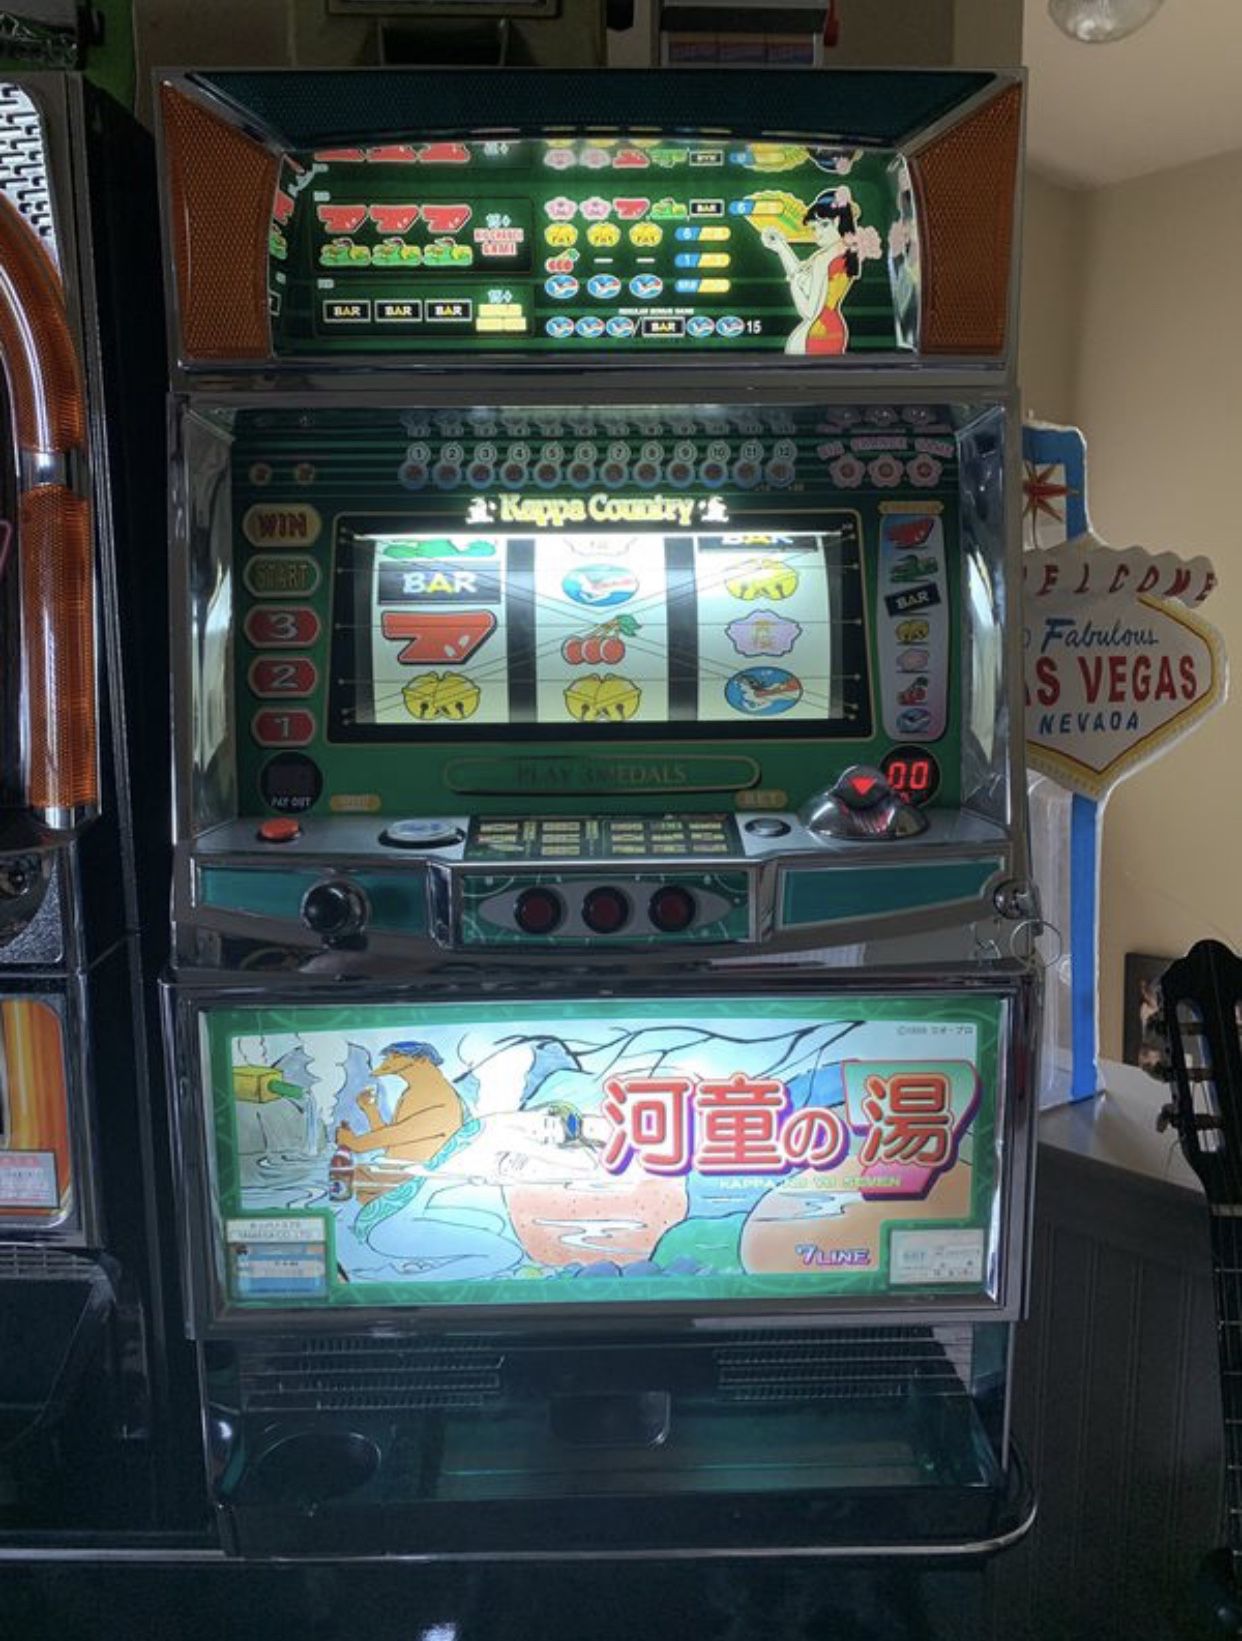 Slot Machine - works great-has keys and tokens